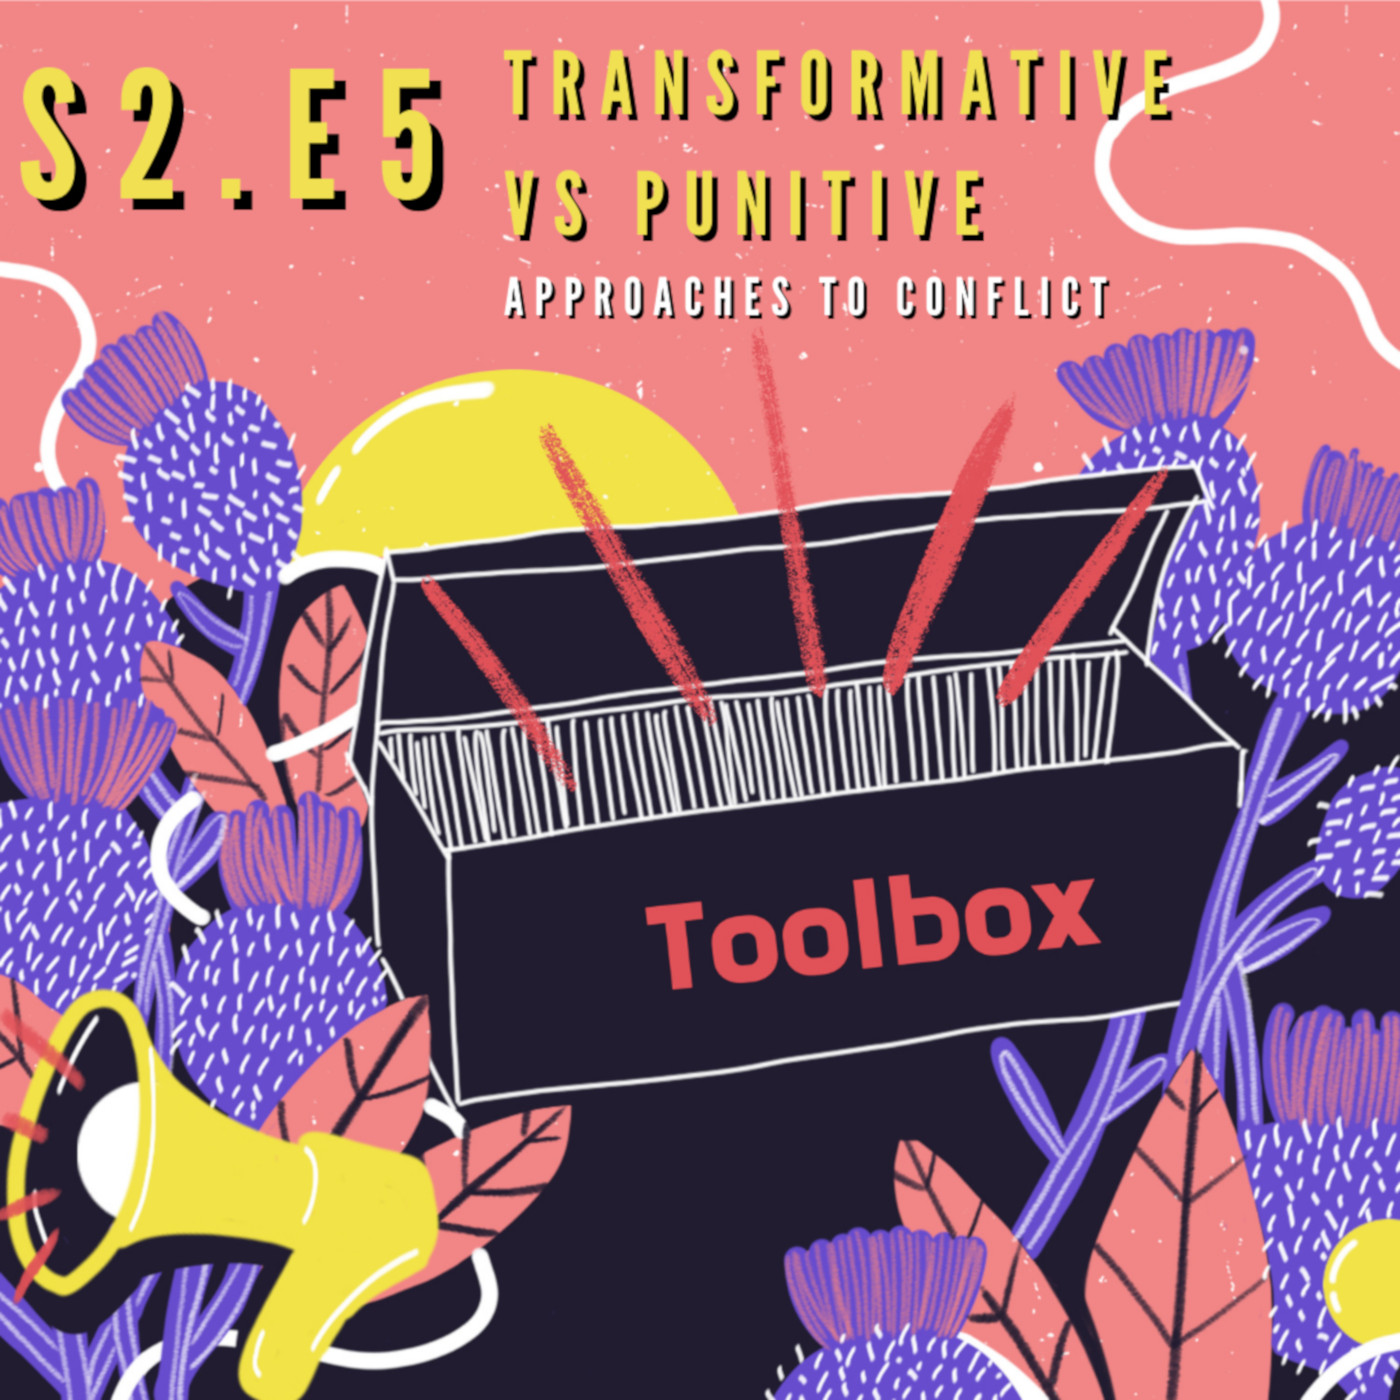 Toolbox: Transformative vs punitive approaches to conflict